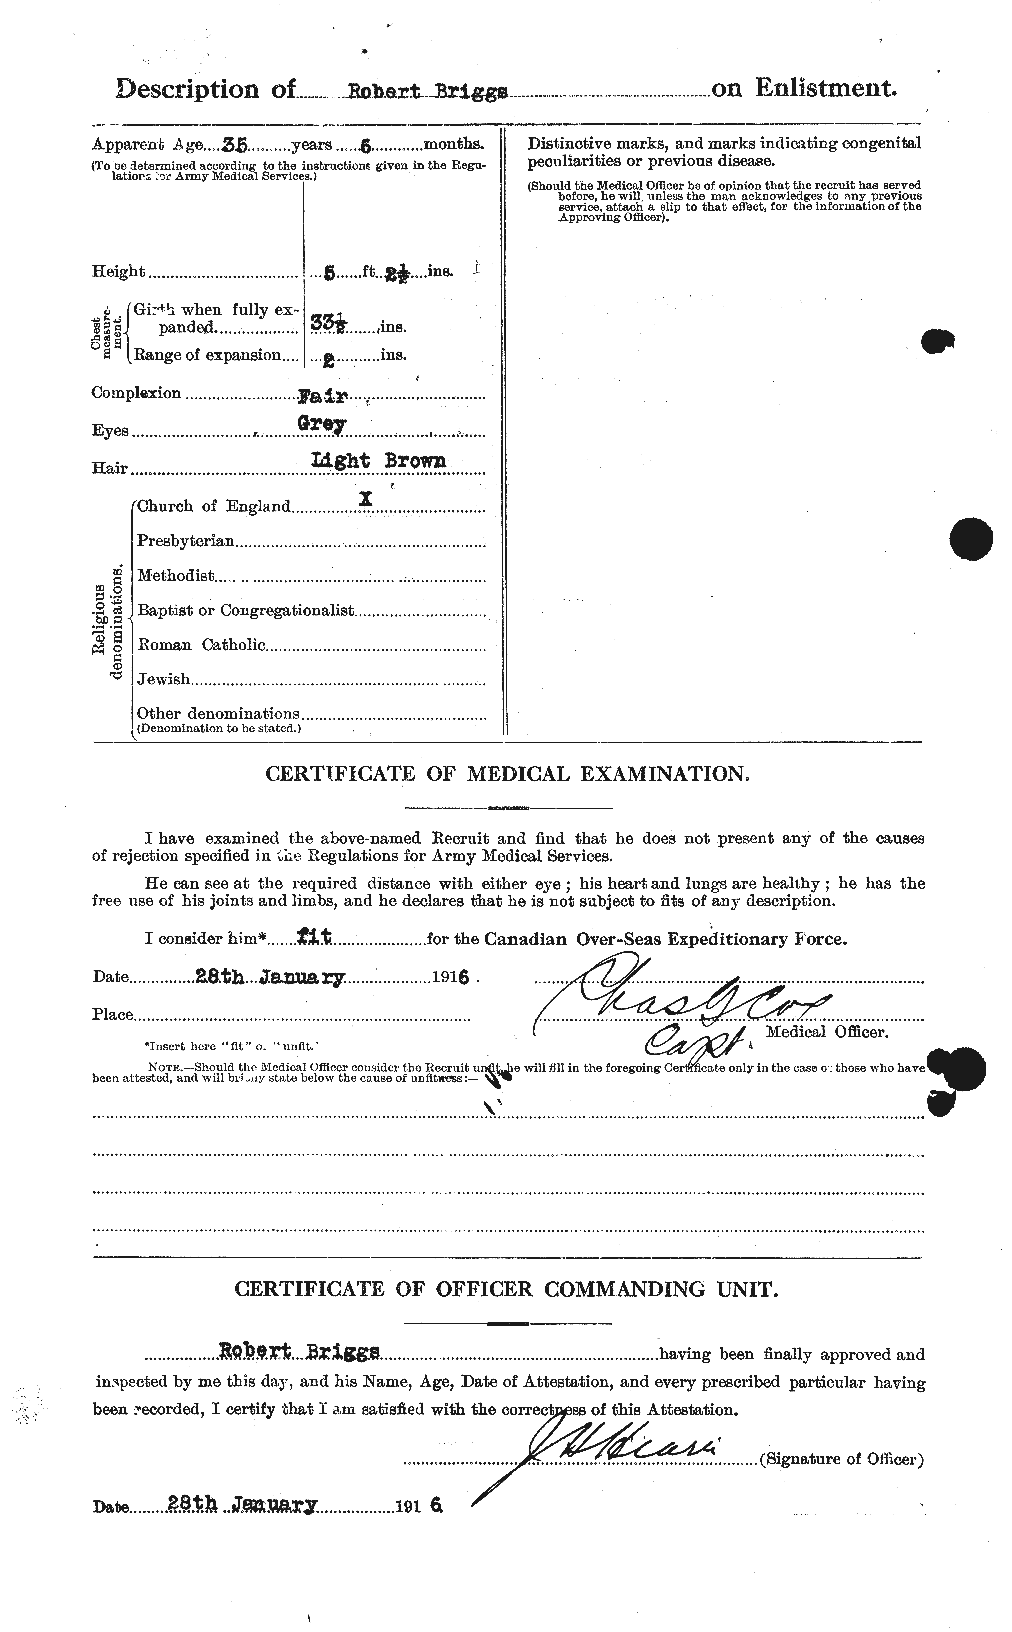 Personnel Records of the First World War - CEF 264089b